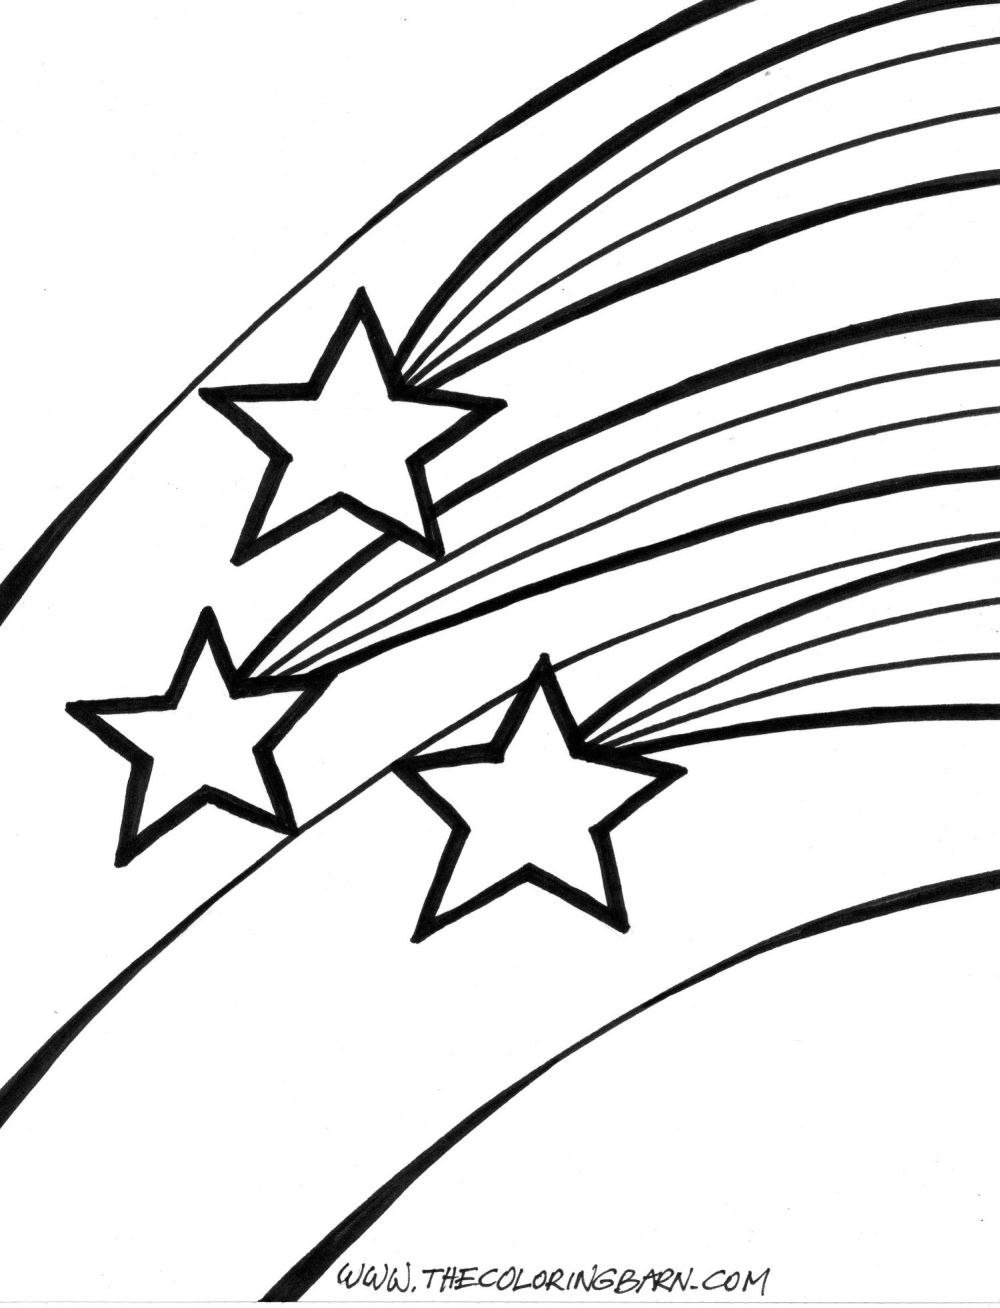 Shooting Star Coloring Pages Printable, star coloring 4 10001308 ...